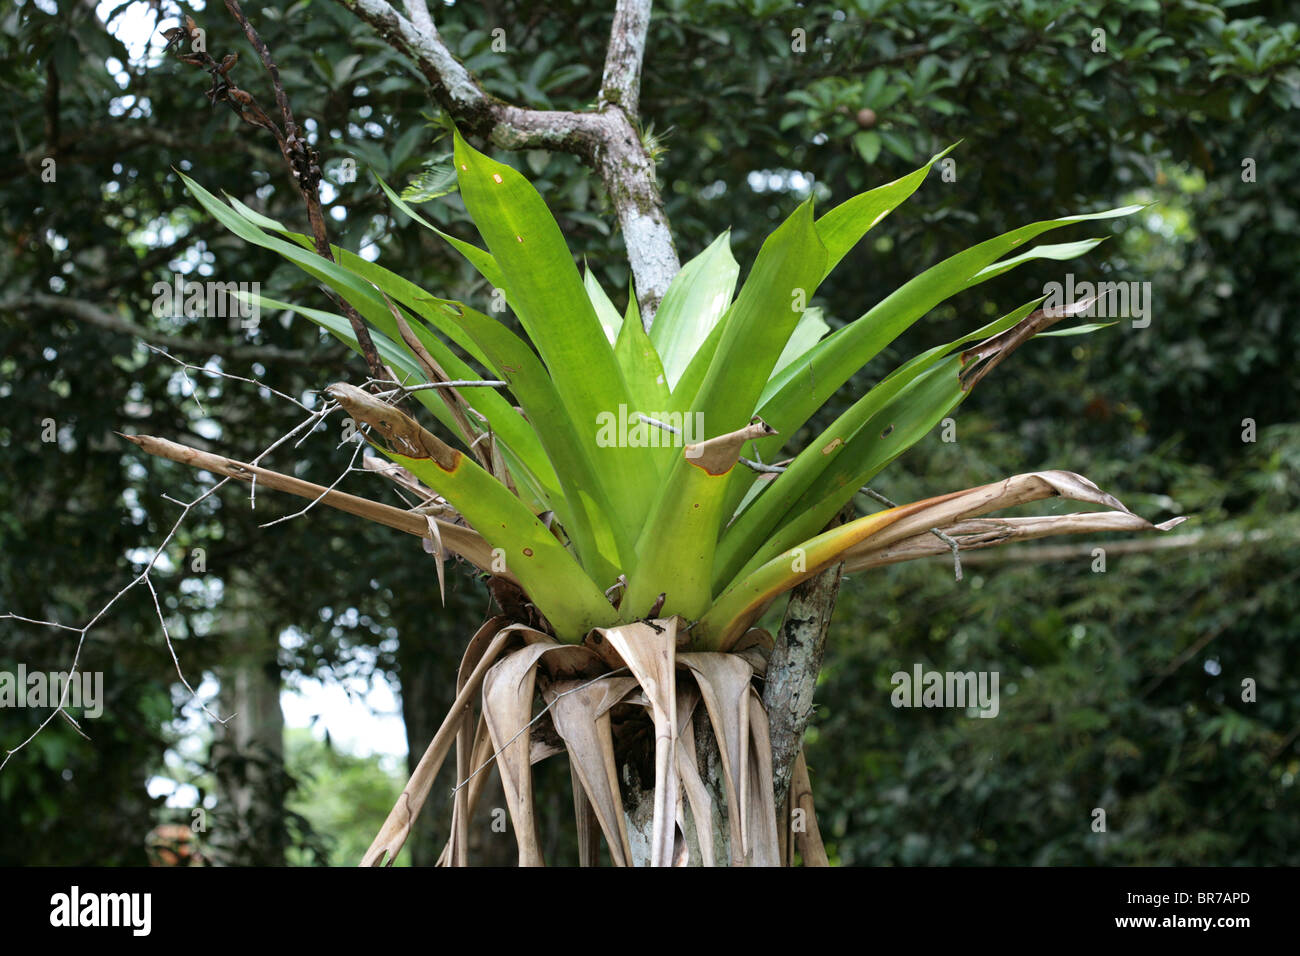 Parasitic plant on a branch of a tree at the Soberania National Park, Panama Province, Panama Stock Photo